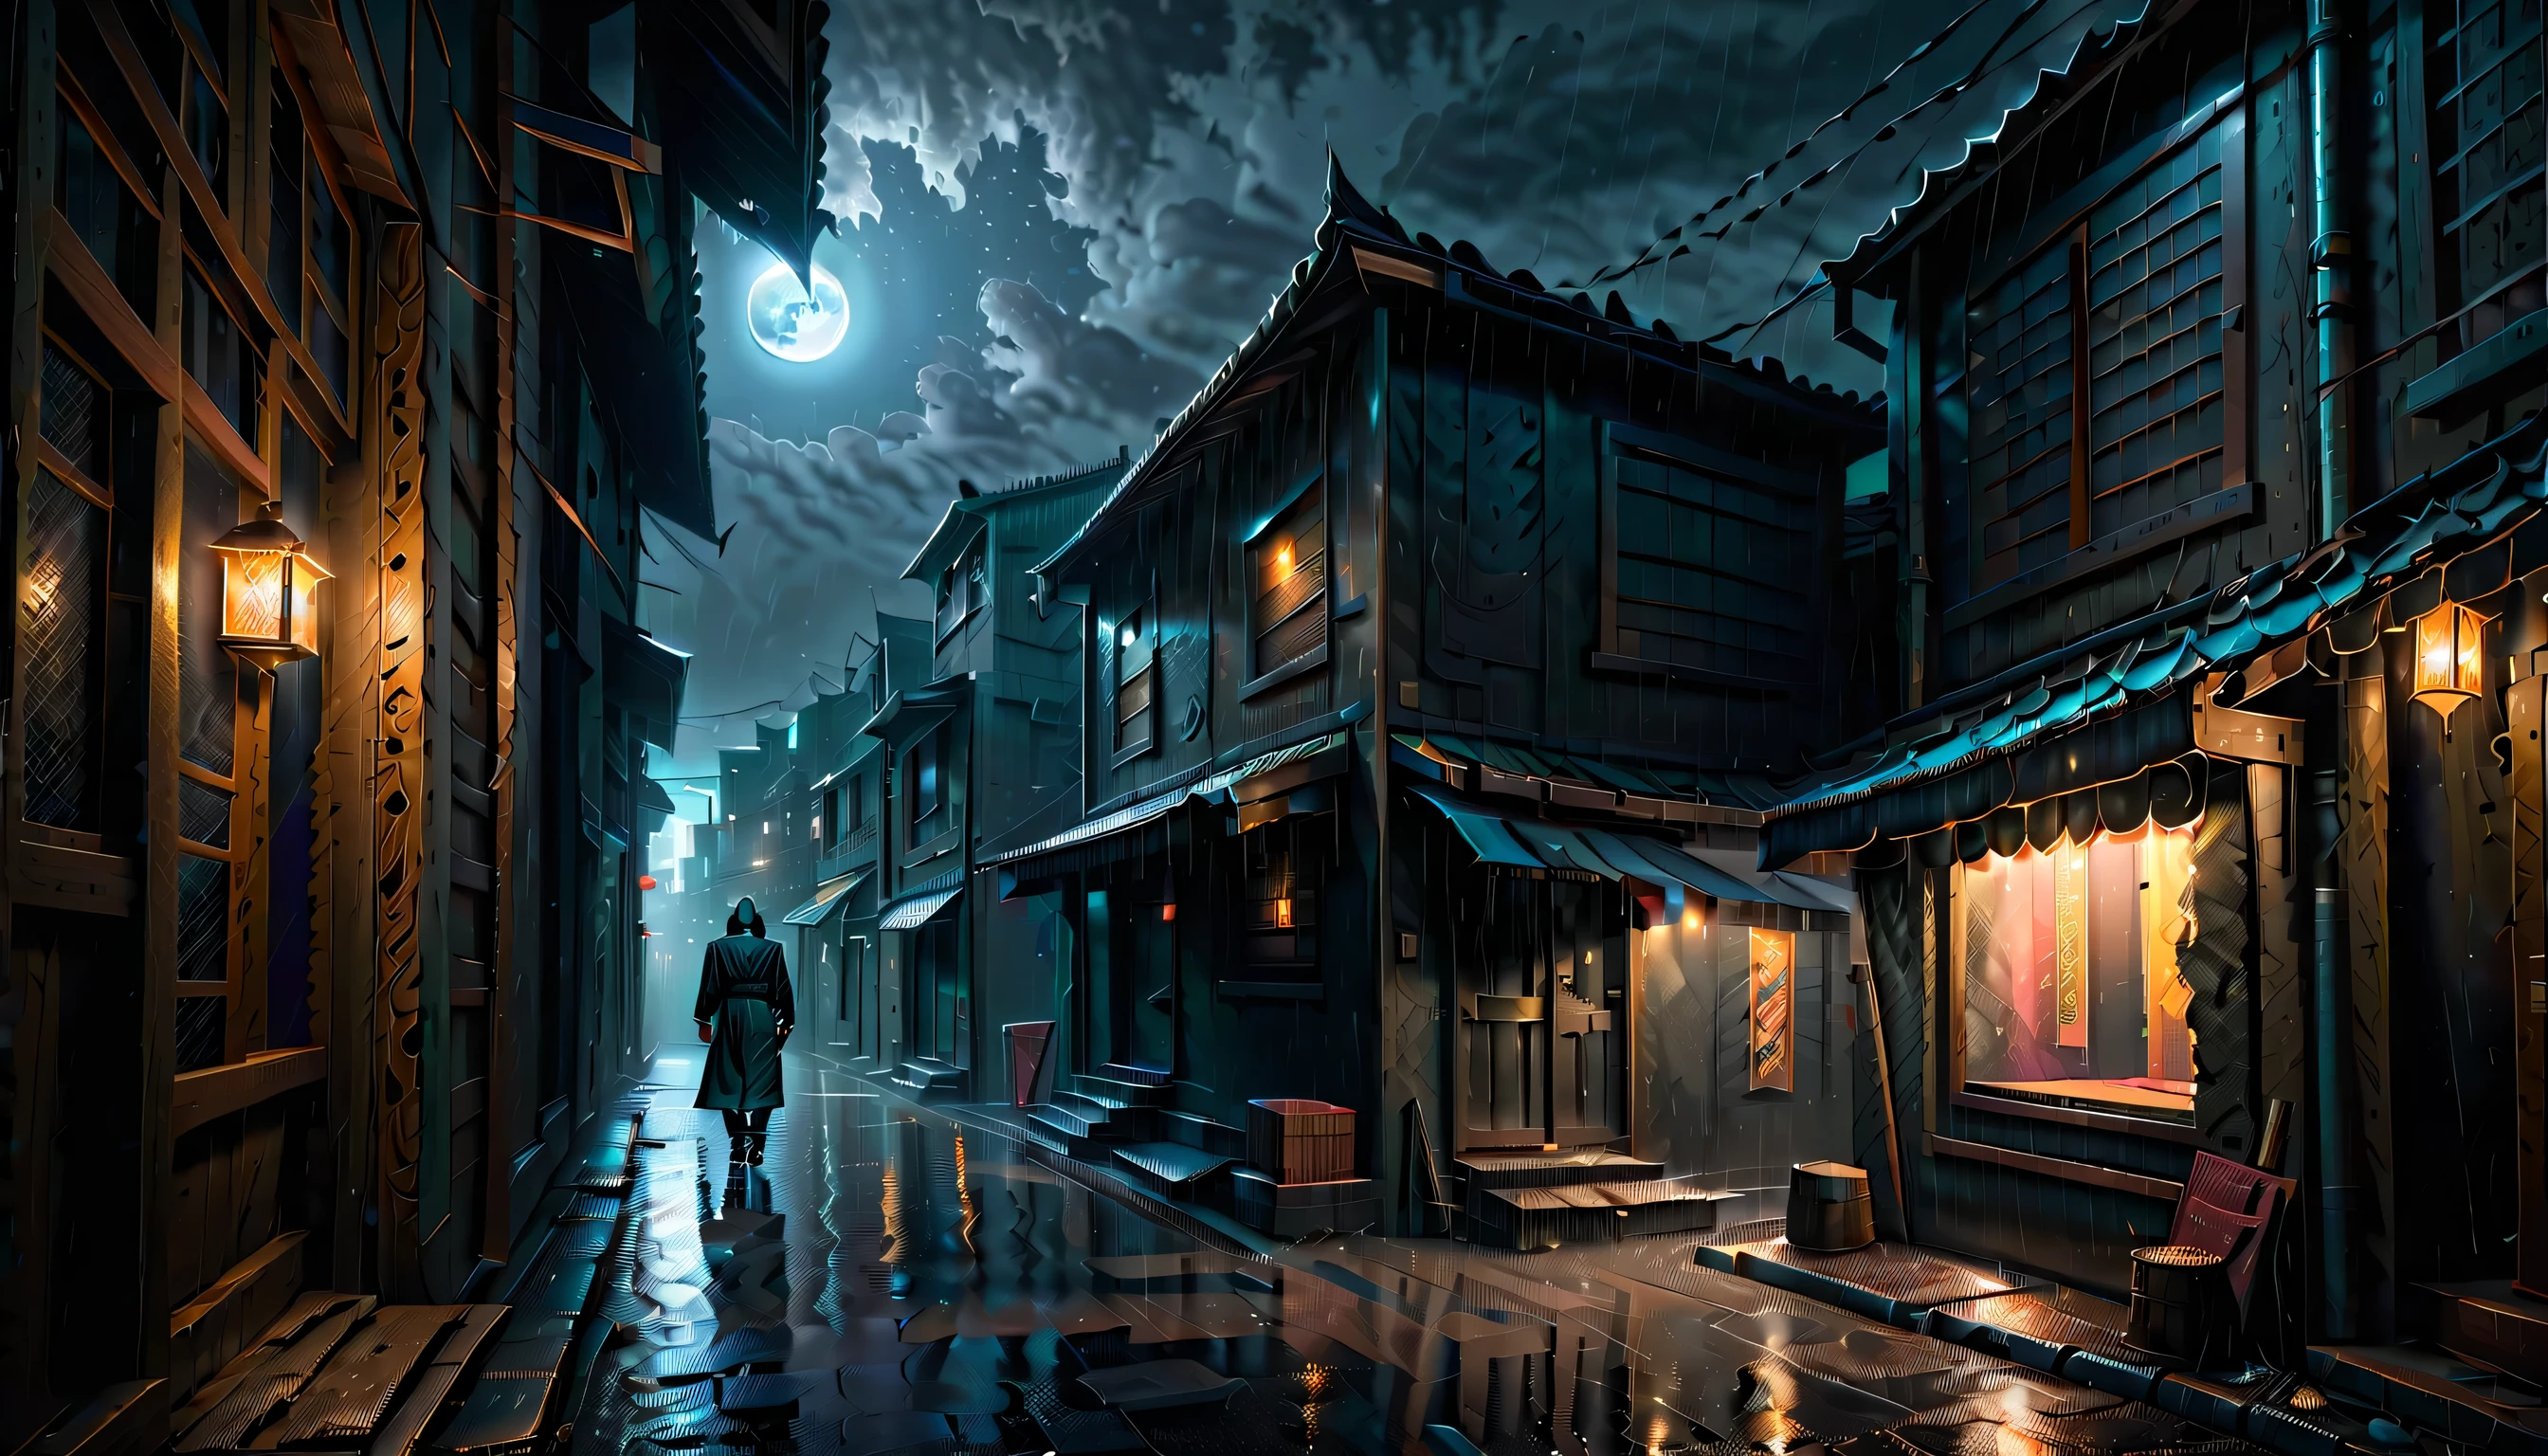 Illustration of a secret base with intricate details, subtle lighting elements, Profile and portrait are too far apart, radiant cooling street, A nervous expression with anger hidden in his chest, Holds a dagger carved with madness, Walk quietly, An atmosphere of beauty like a finely honed blade, Dark fantasy cityscape at night, drizzle and darkest clouds drift, Eternal time, It feels like the wind of eternity,  atmosphere, Tears, Streetlights shining with sadness, Sadness shines through your face, Cold rain, expression of wet clothes, Very dim light with the essence of dark fantasy, dim sadness glow particles coating, sad wish, Still like a movie, A nightmarish sky, Moon and stars through the clouds, Solemn evening, Palette knife and brushstroke supplements, matte painting, wish for death, shinigami atmosphere, One Person, wish for death, floating in sky. additional neo-gothic, shadow minimalism,